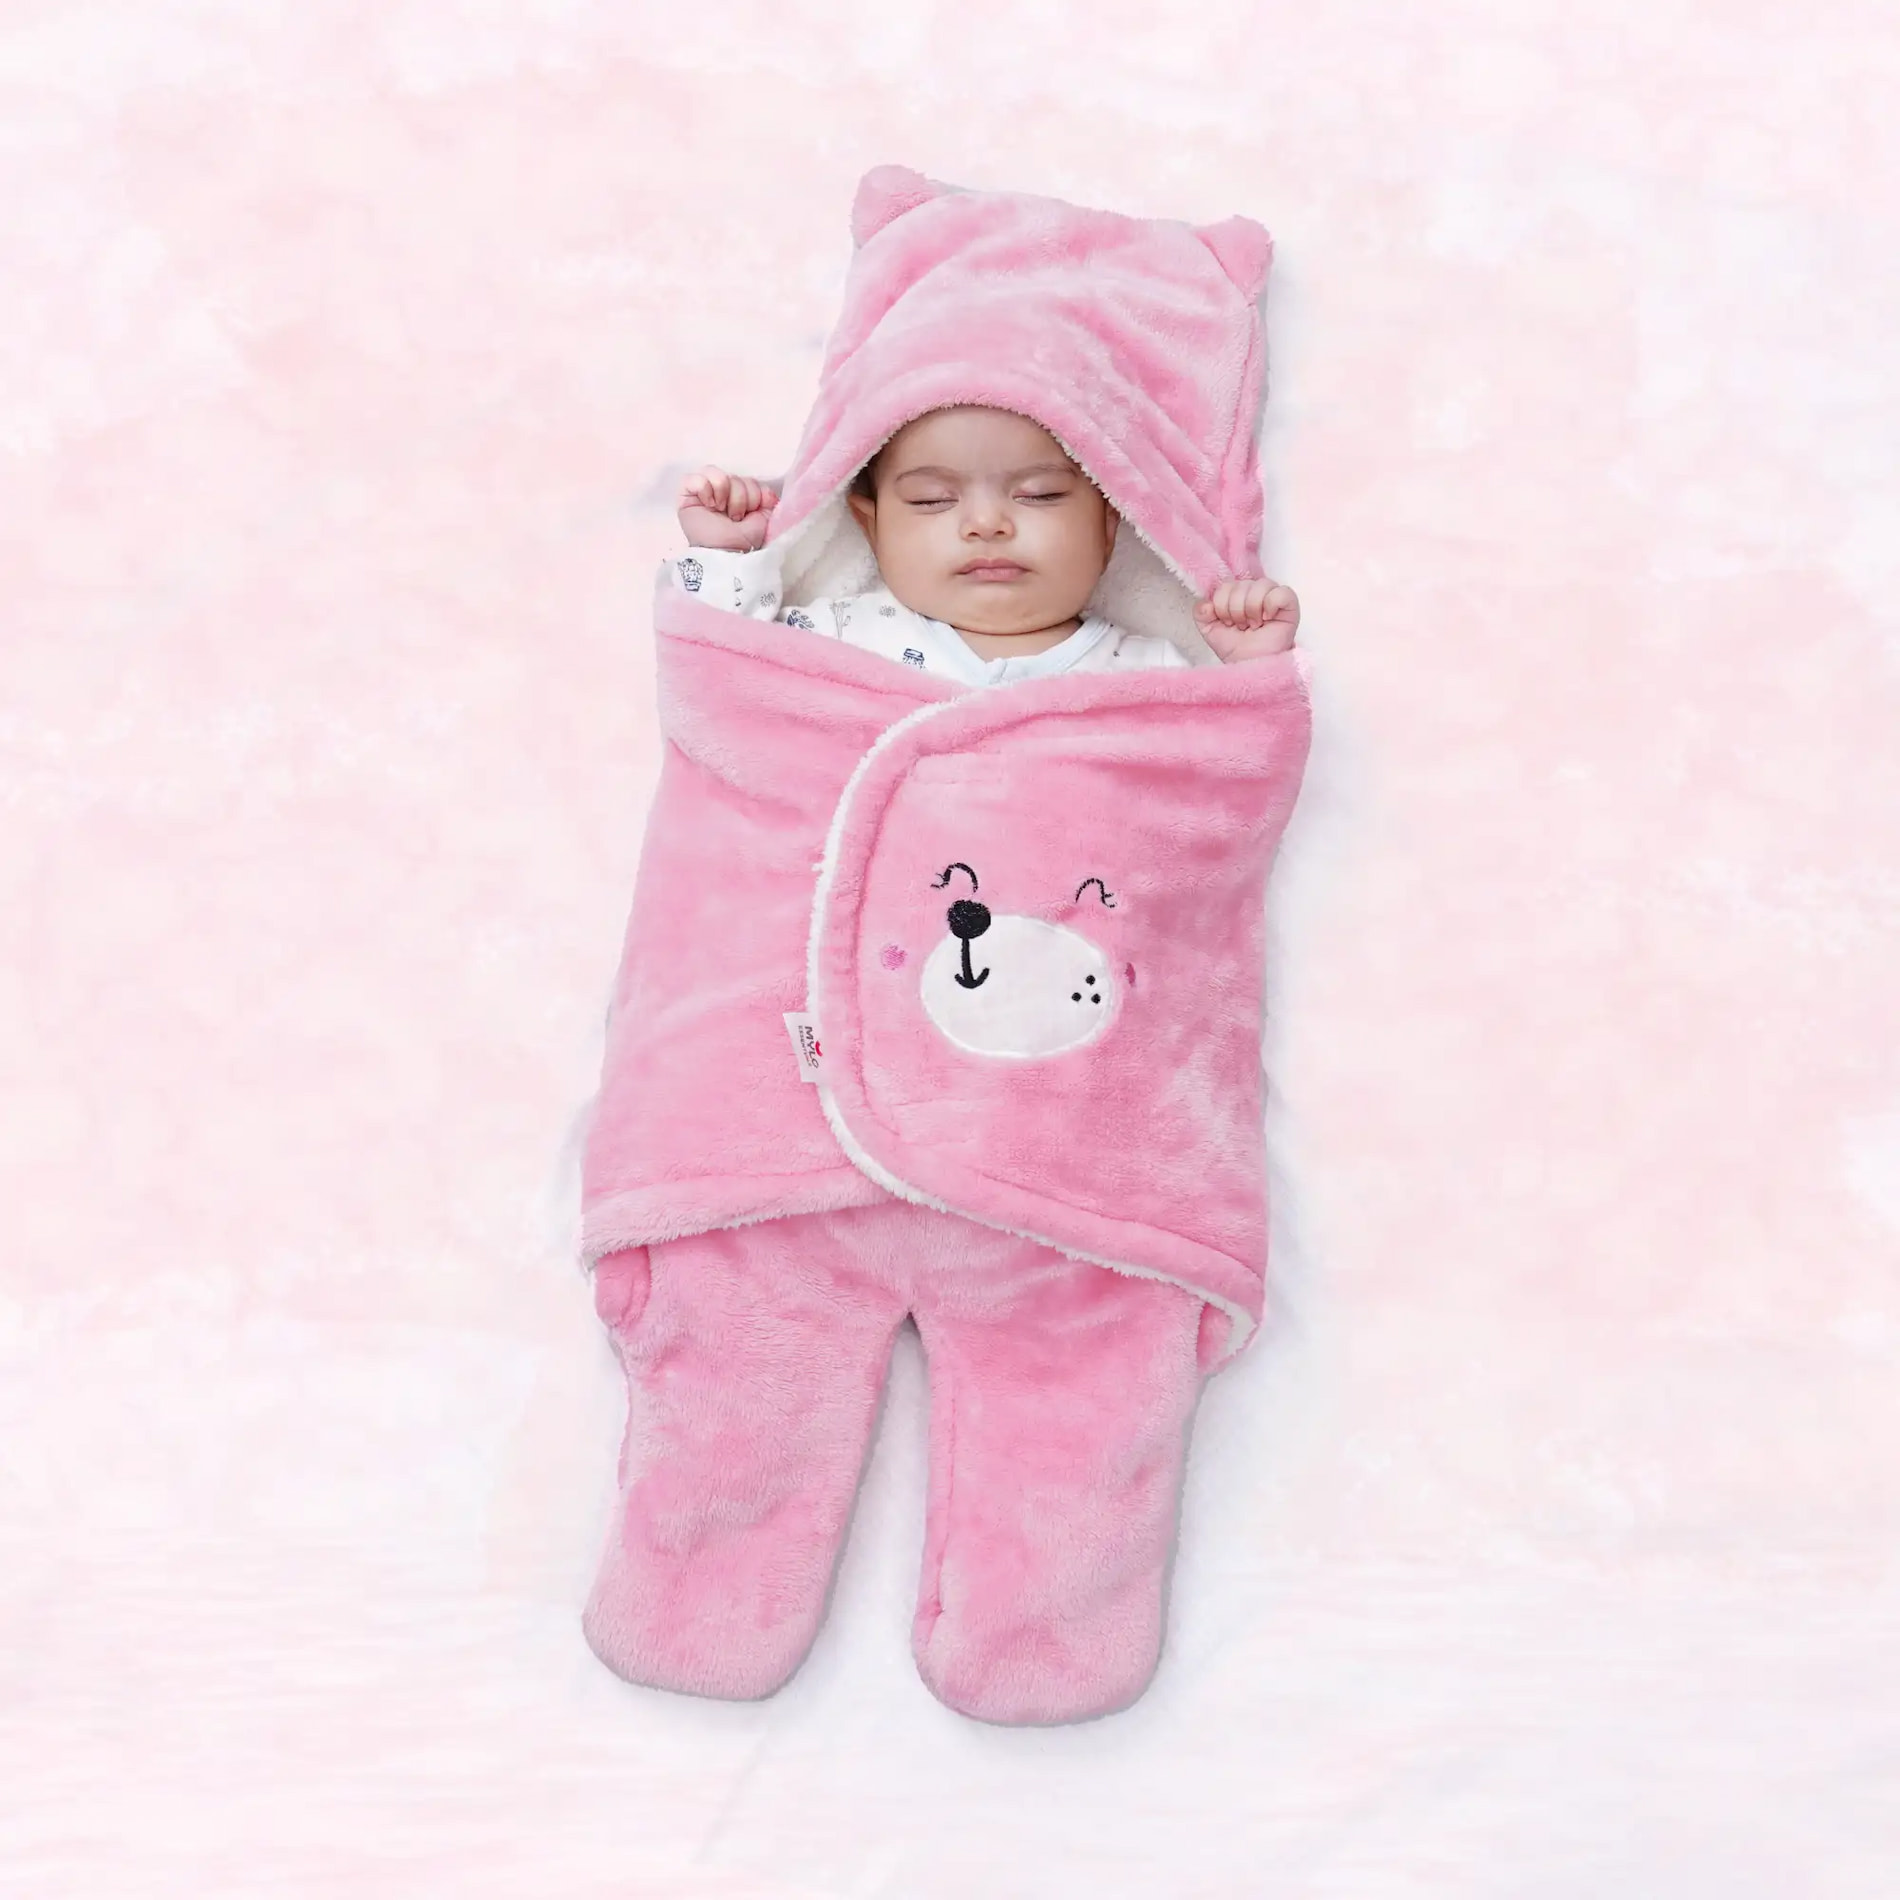 Baby Wrapper - Light Pink